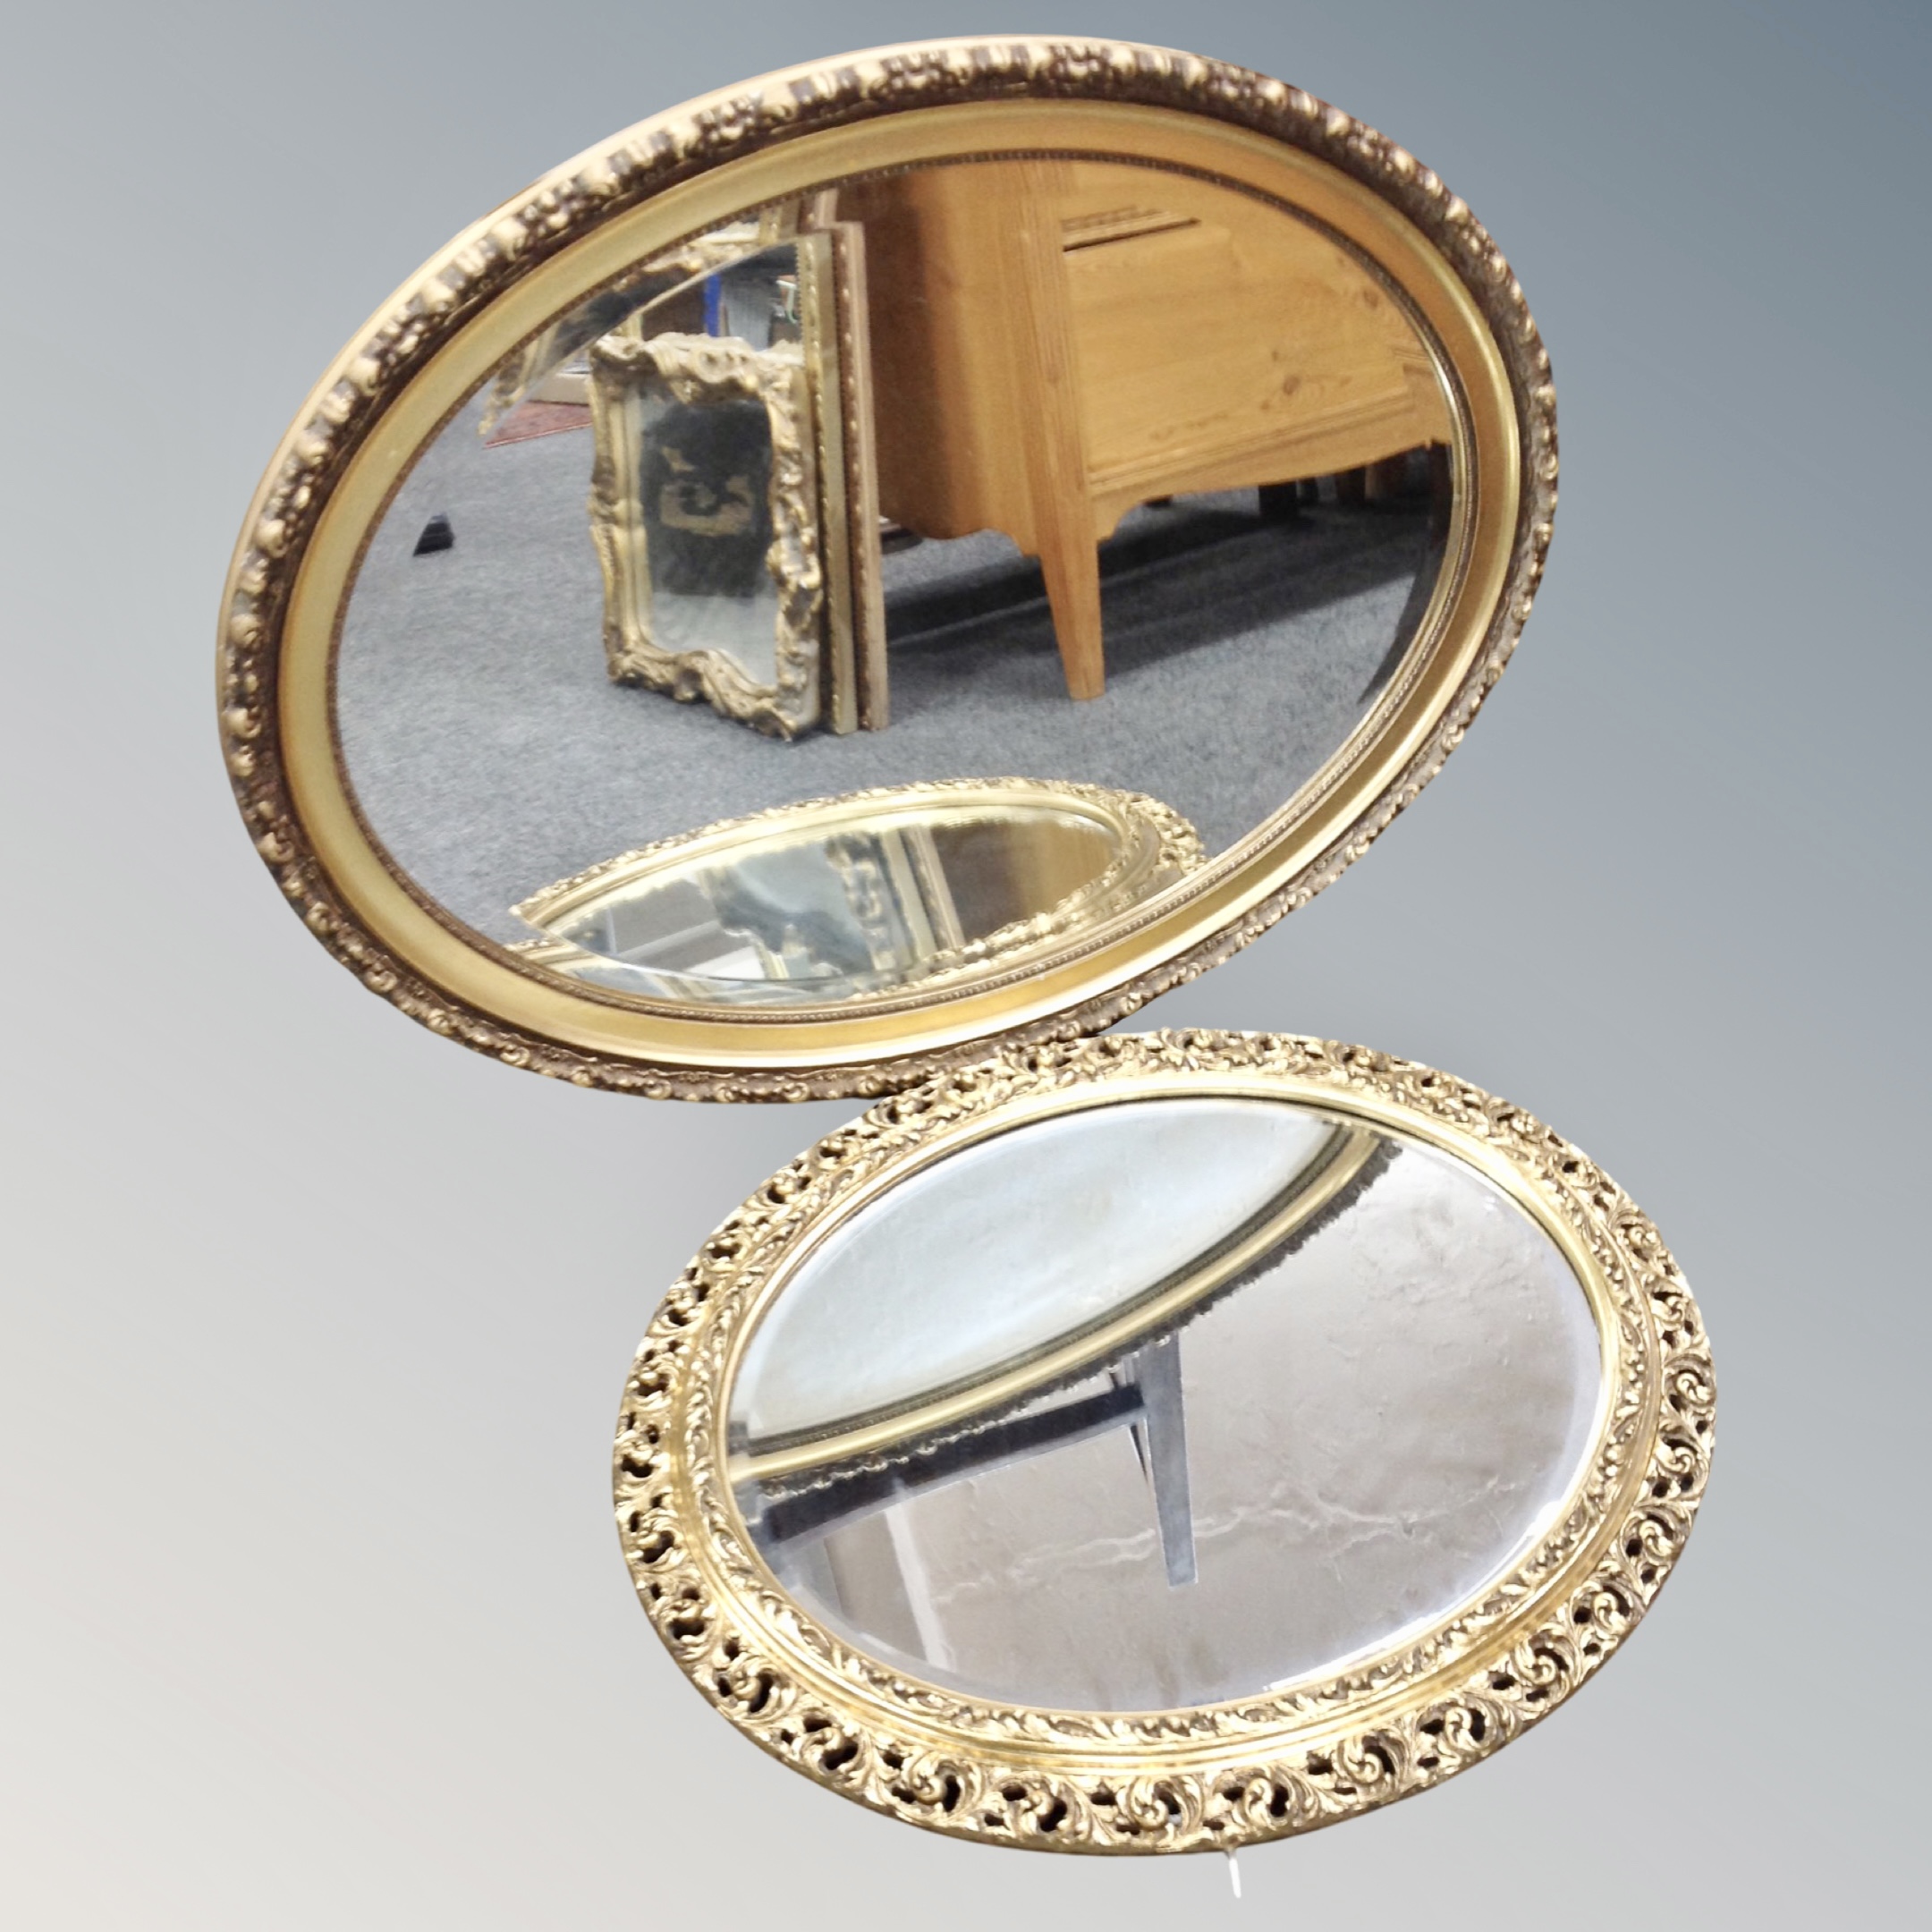 An oval bevel edged mirror in gilt frame together with a further oval framed mirror.